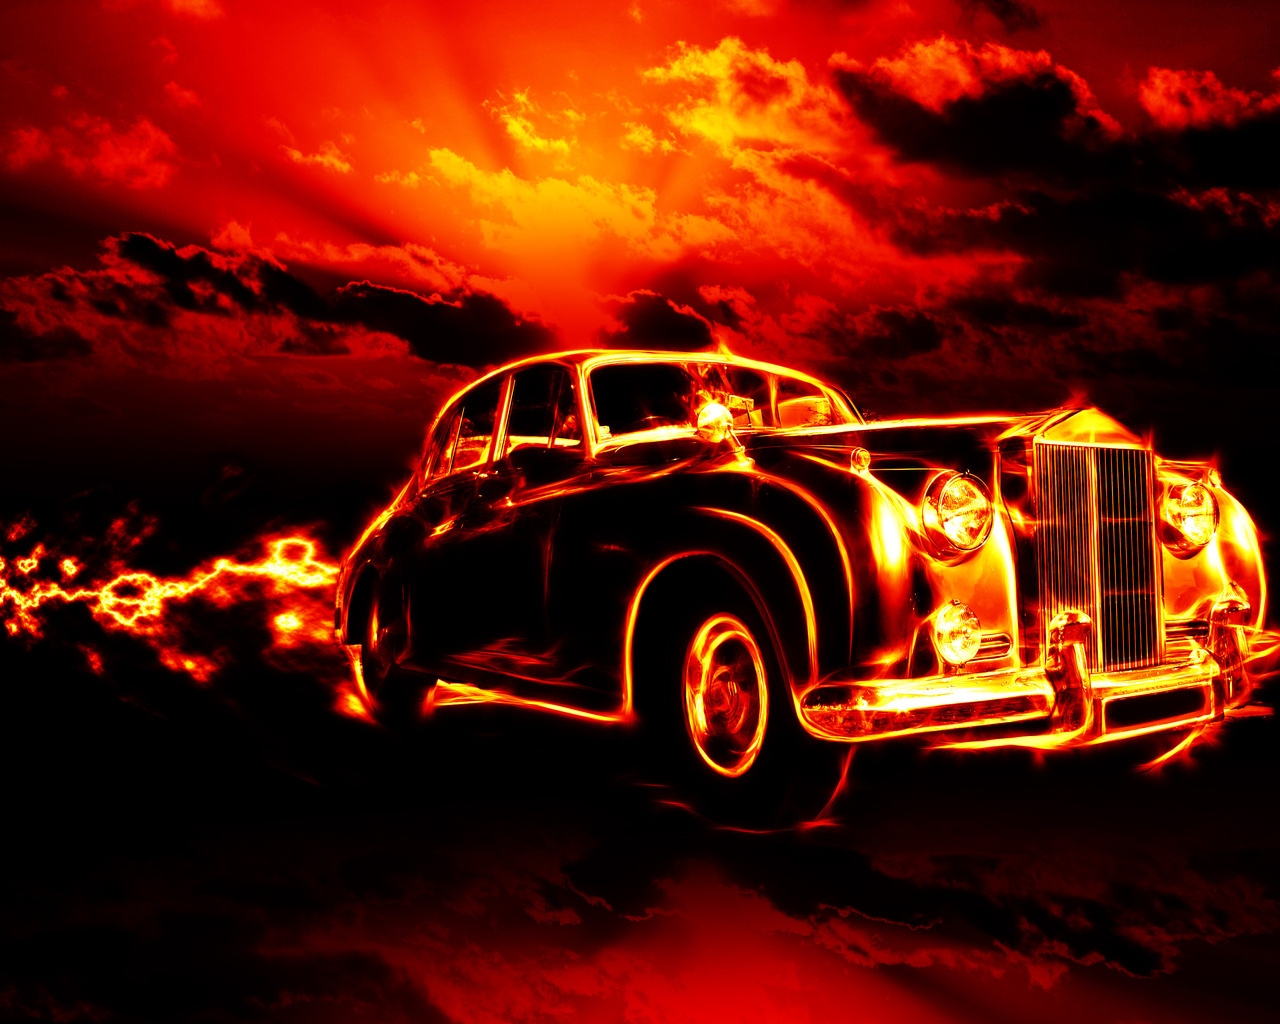 Vintage Car in Fire for 1280 x 1024 resolution